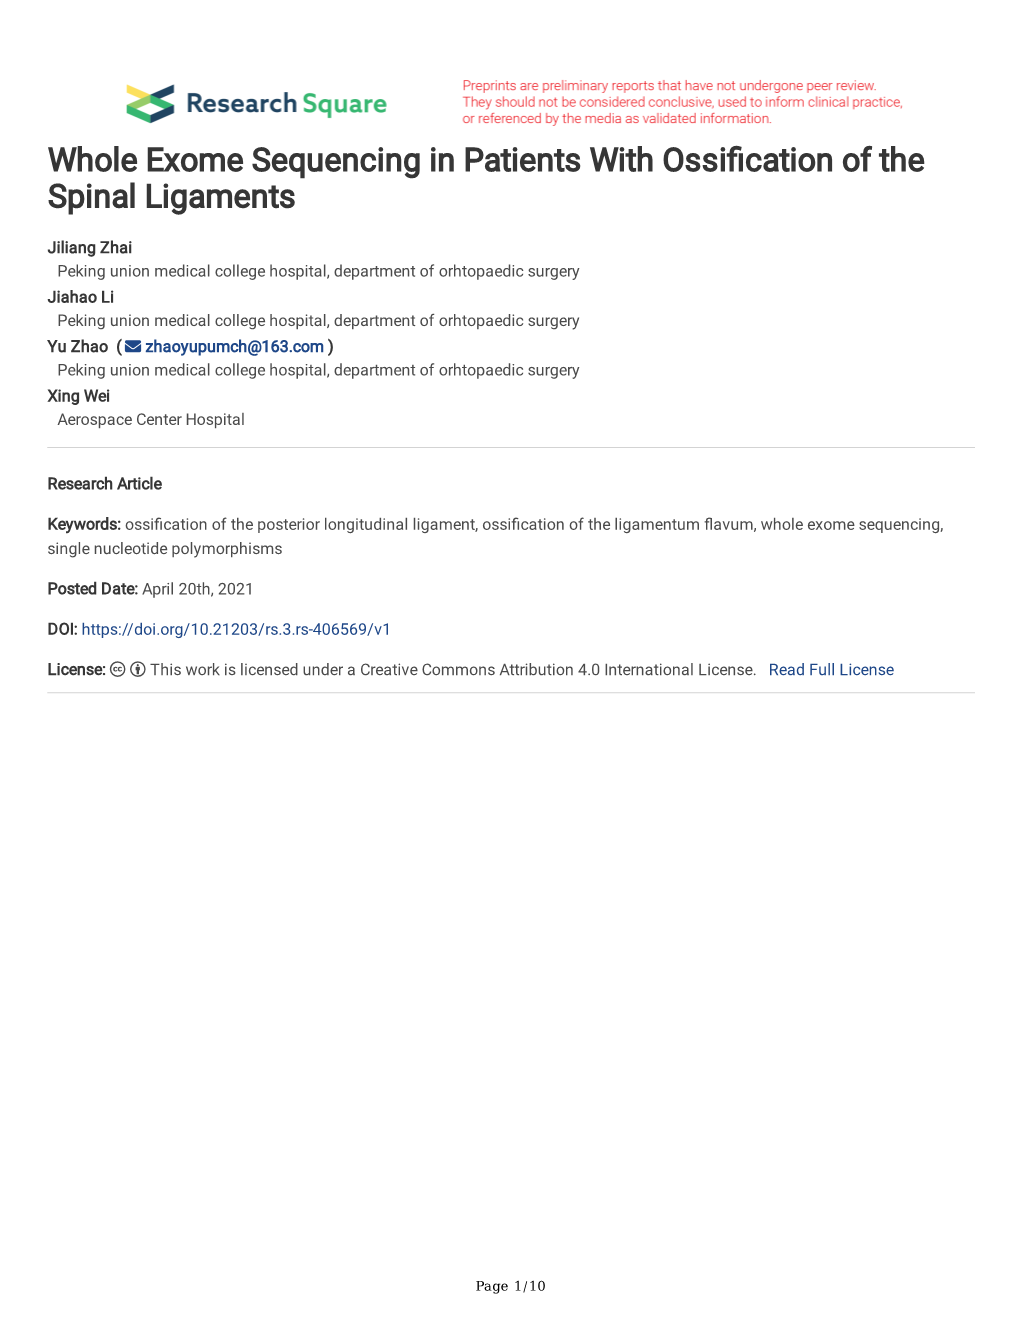 Whole Exome Sequencing in Patients with Ossi Cation of the Spinal